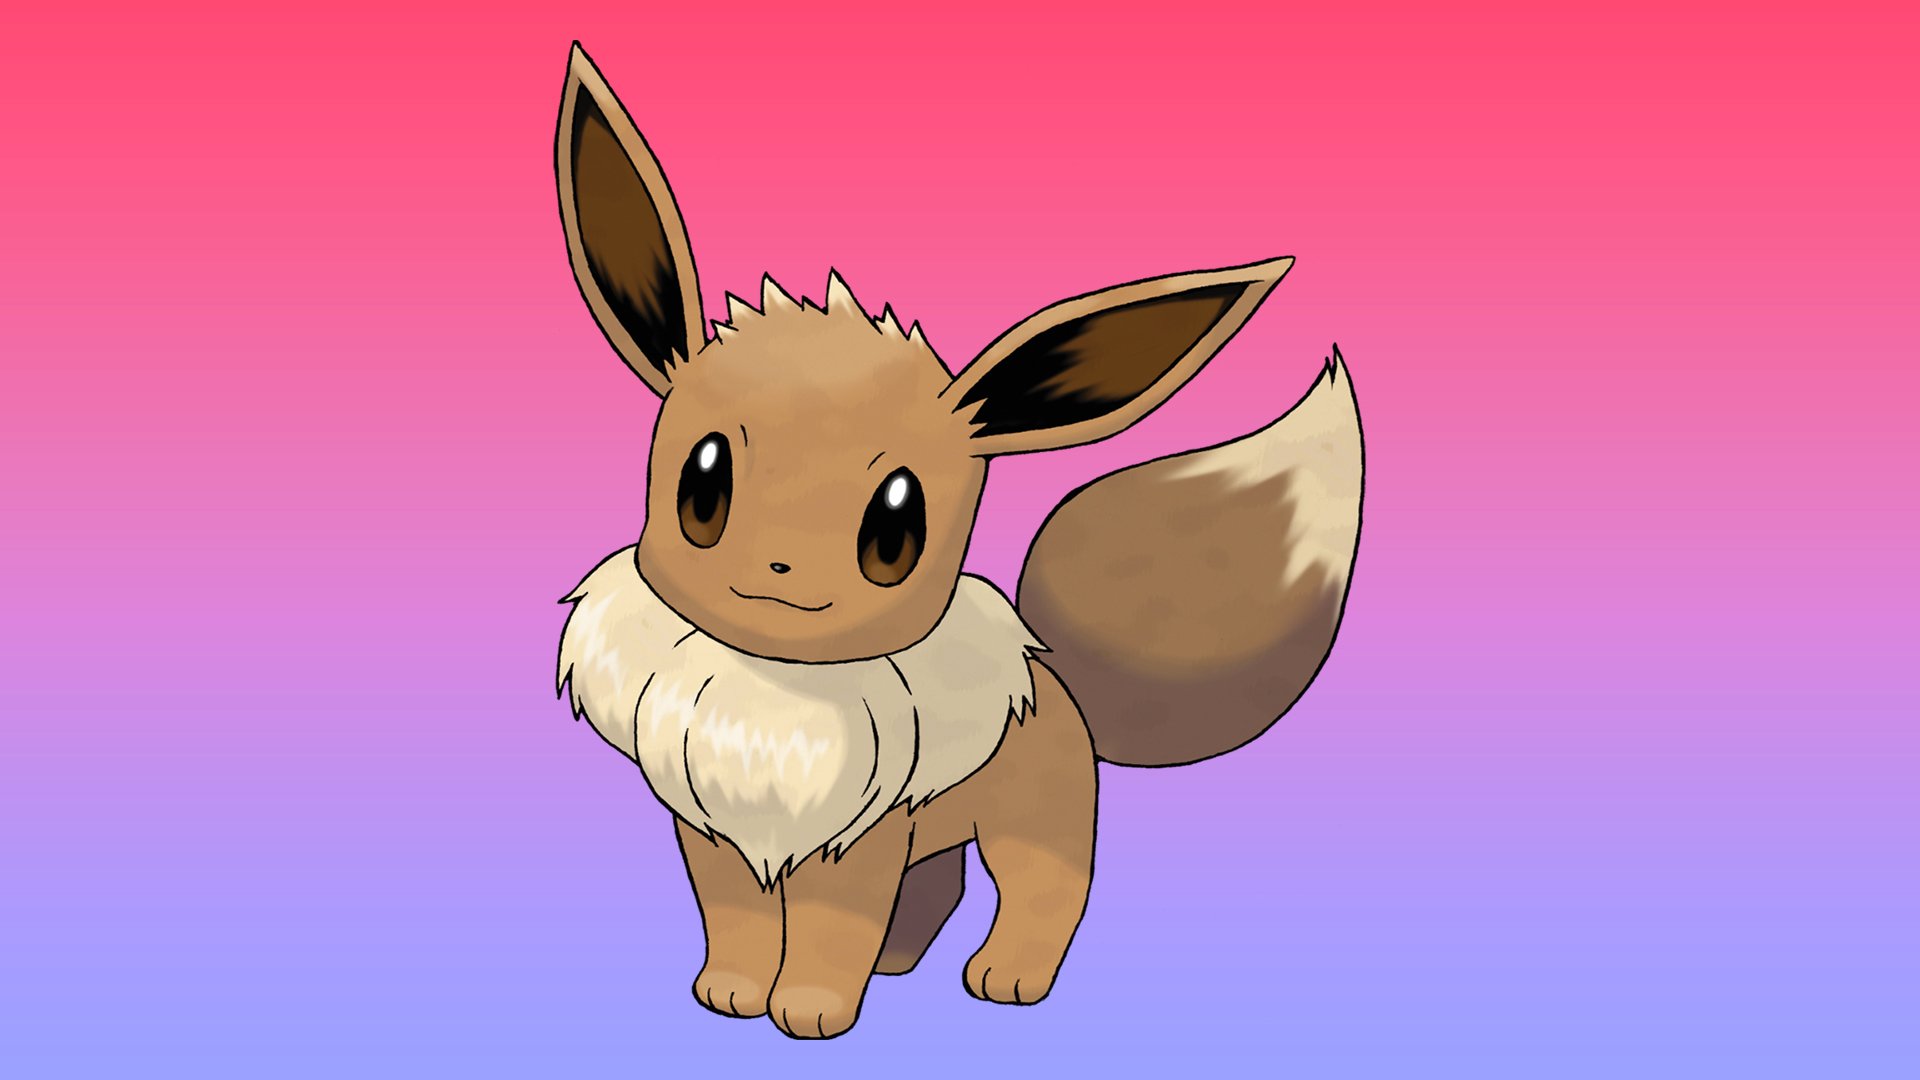 Why can't I move this eevee into violet? : r/PokemonHome